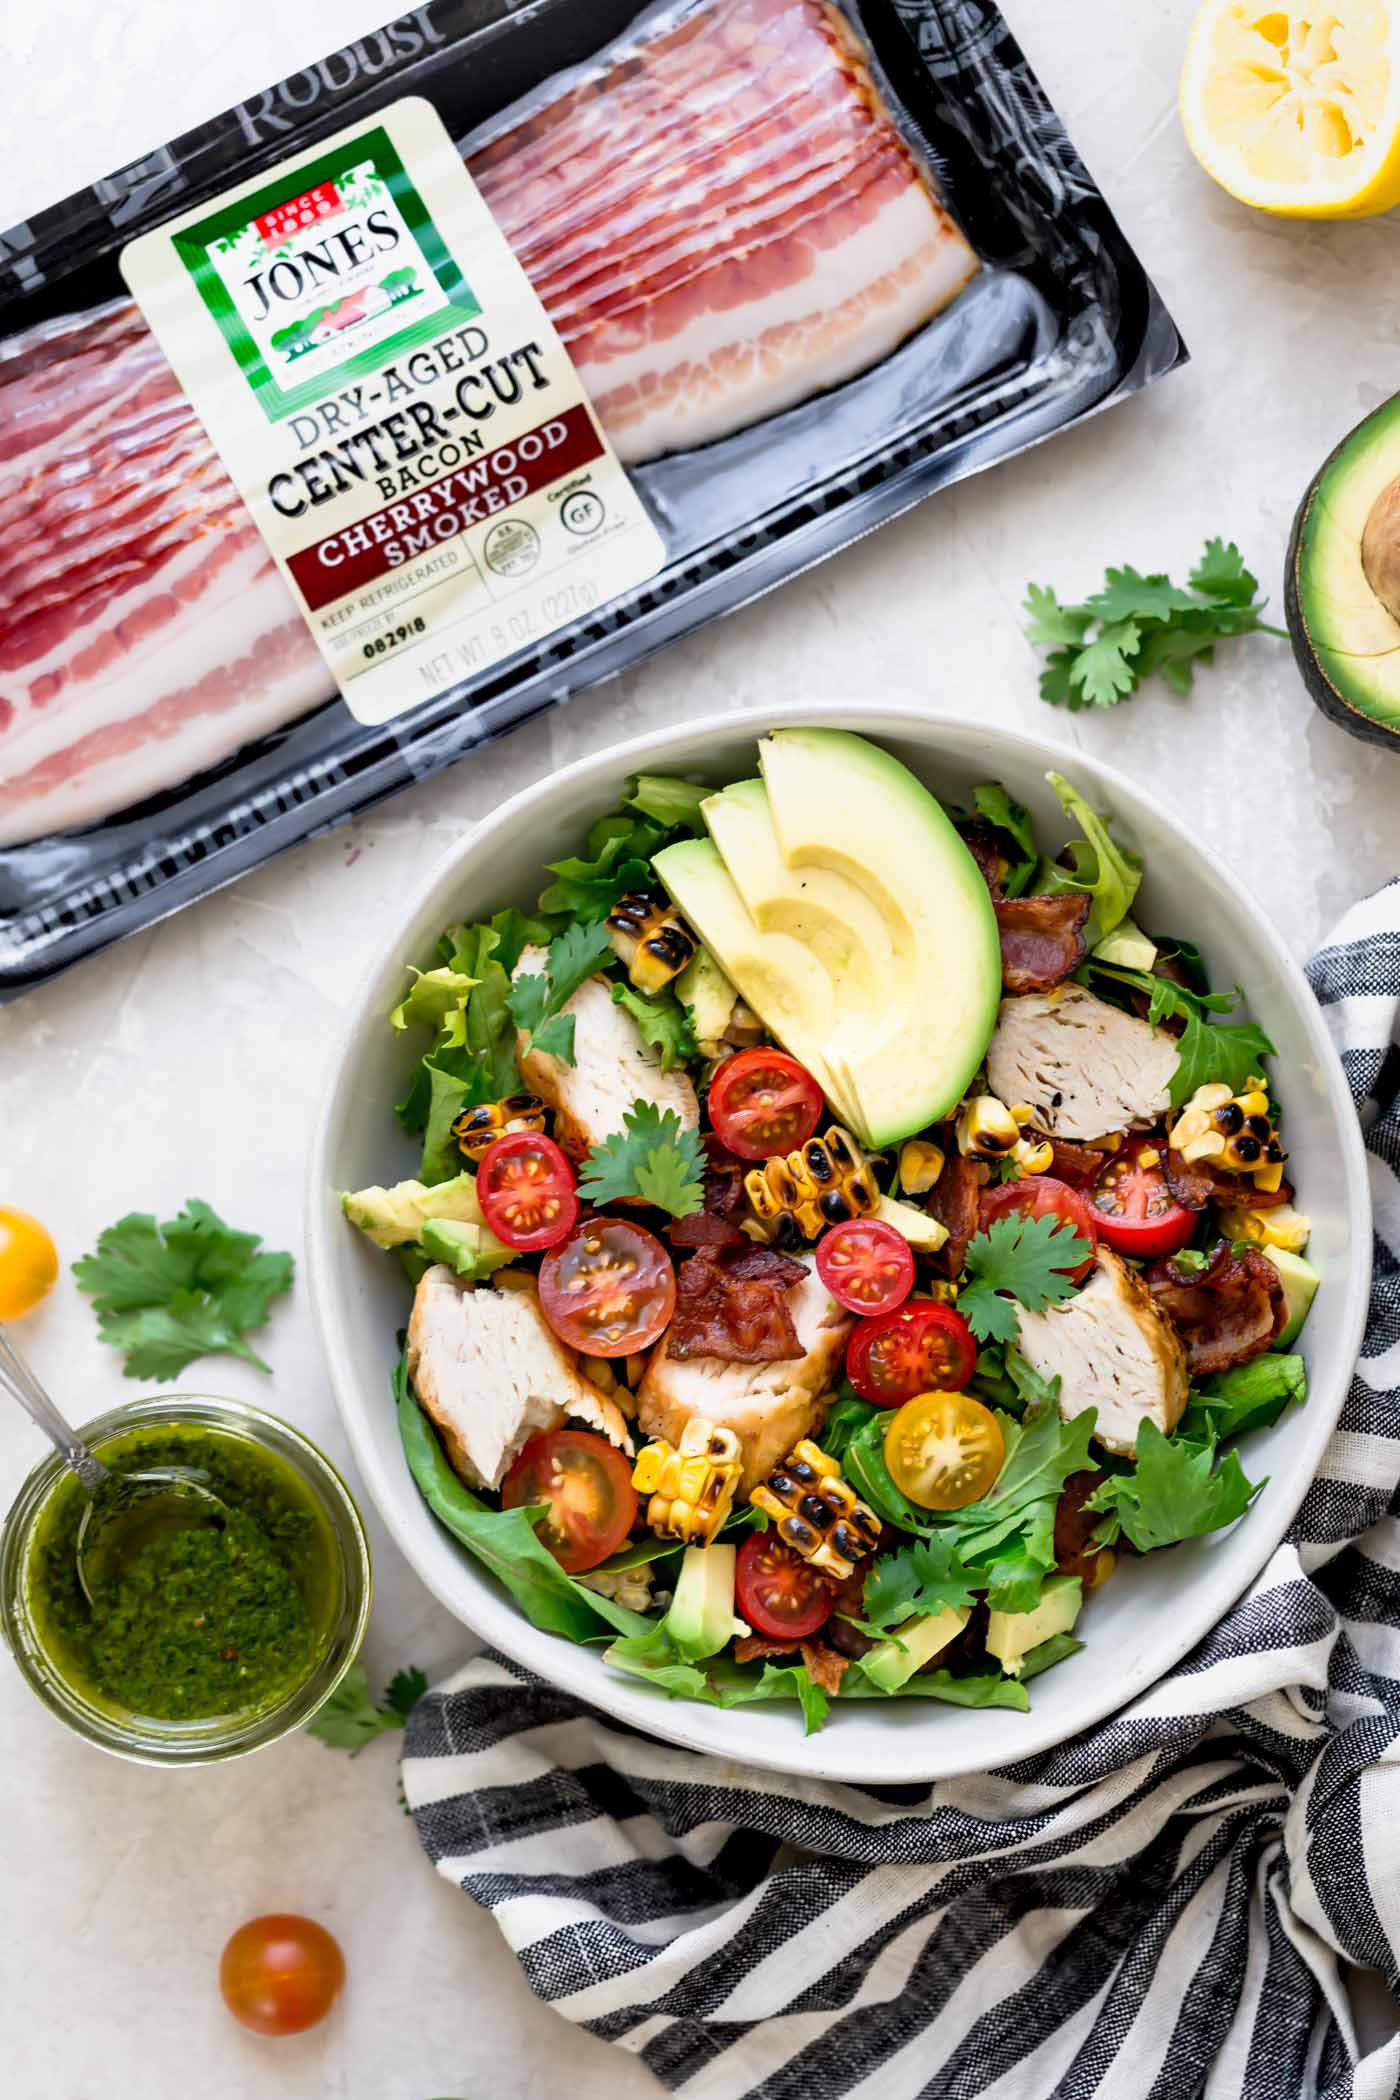 a light & fresh blt salad for summer loaded with bacon, cherry tomatoes, sweet corn, avocados, grilled chicken, & an easy cilantro basil vinaigrette. this blt salad recipe is hearty, but super fresh, making it the perfect easy summer dinner. naturally gluten-free & perfect for meal prep! #playswellwithbutter #bltsalad #saladrecipe #dinnersalad #summersalad #glutenfree #easyglutenfreerecipes